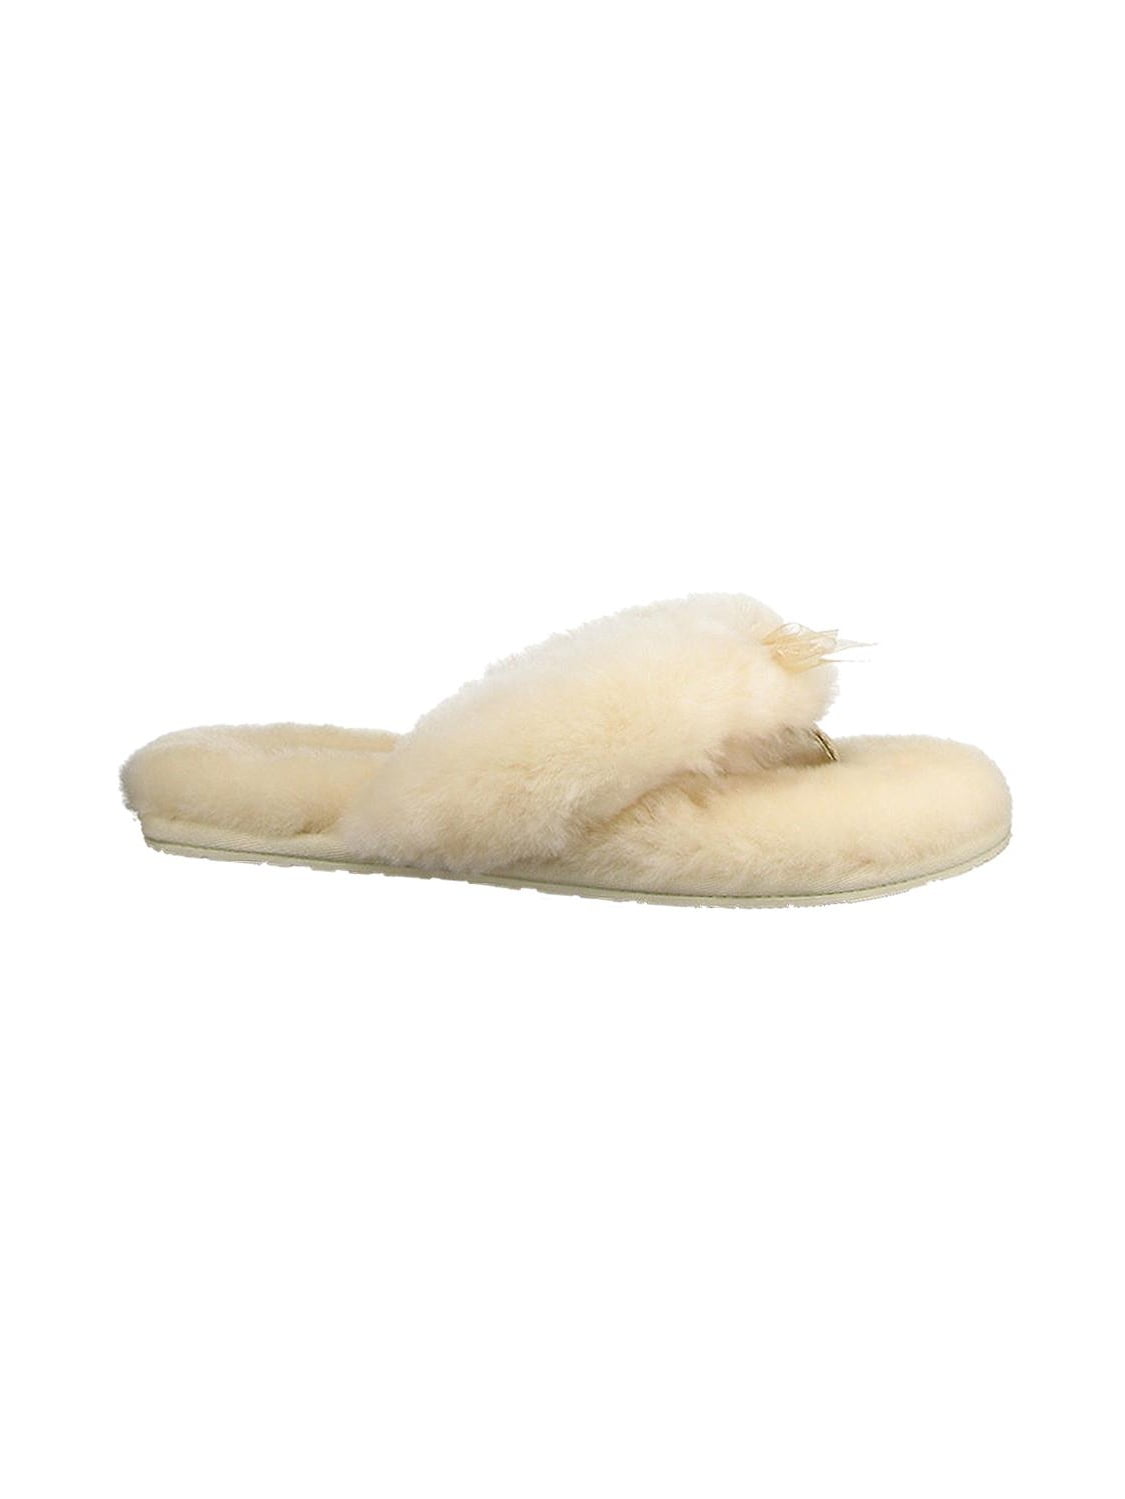 womens ugg slippers size 6